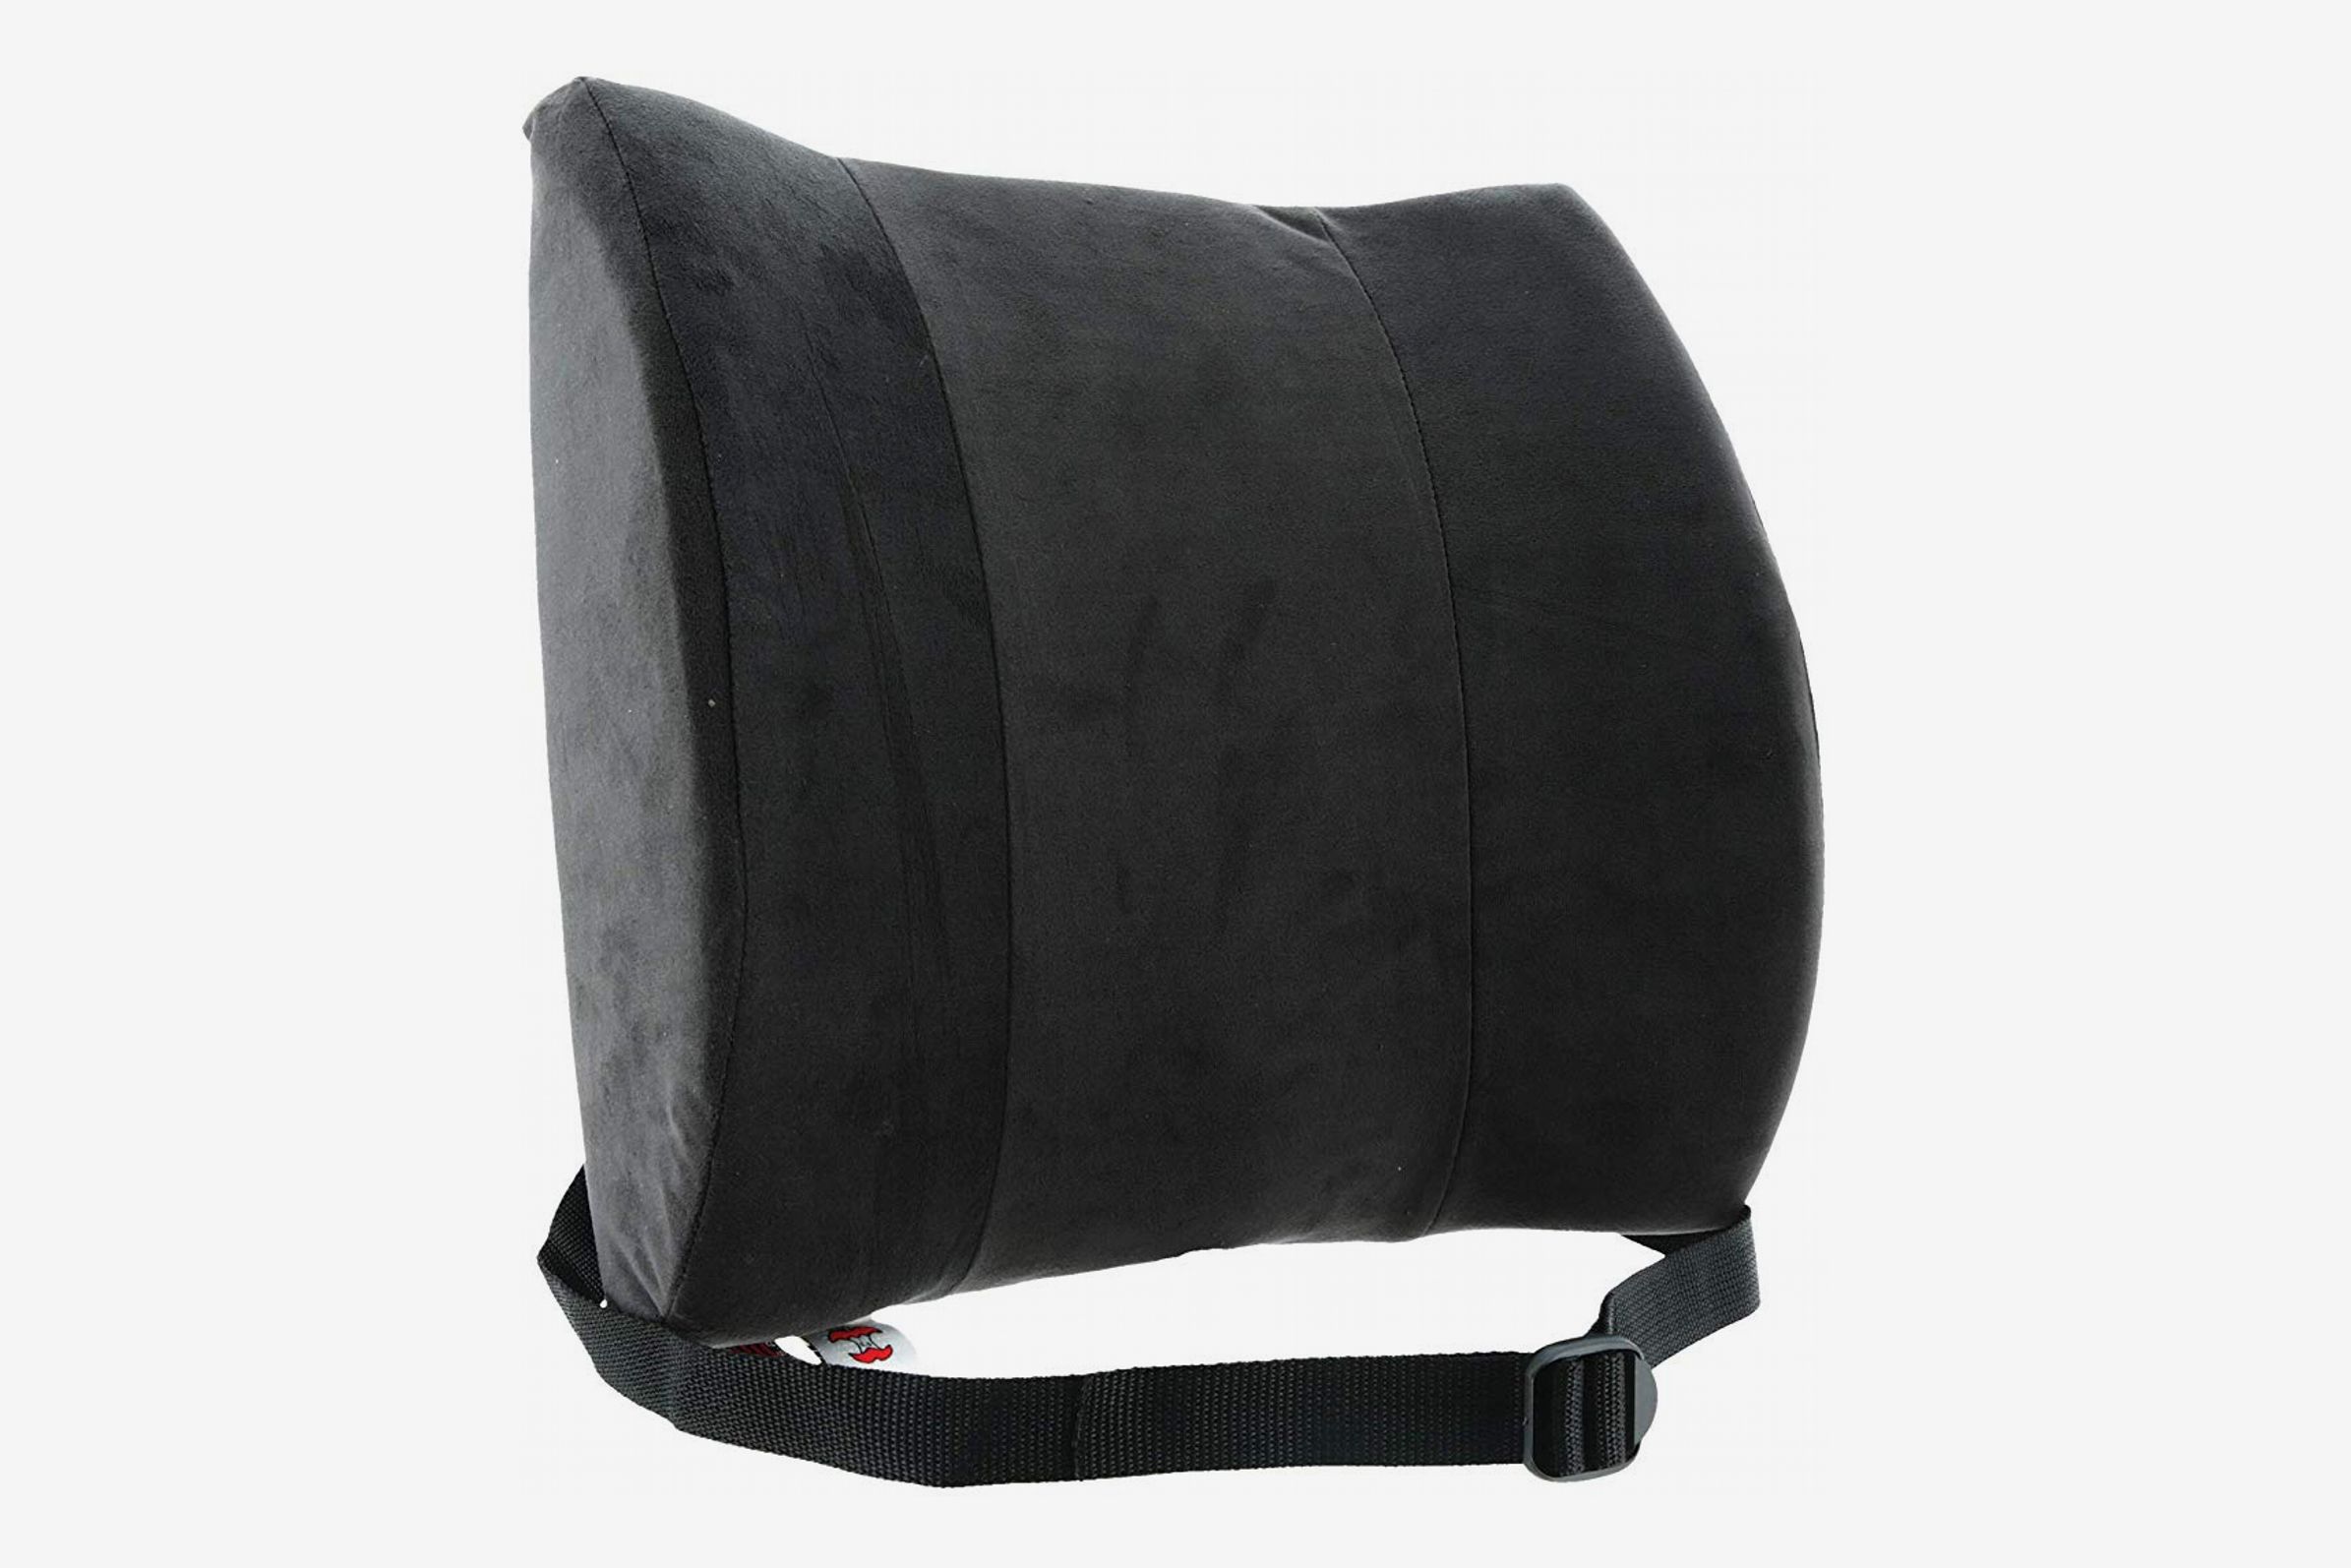 Car back support - Pillows, cushions and support - Physiotherapy